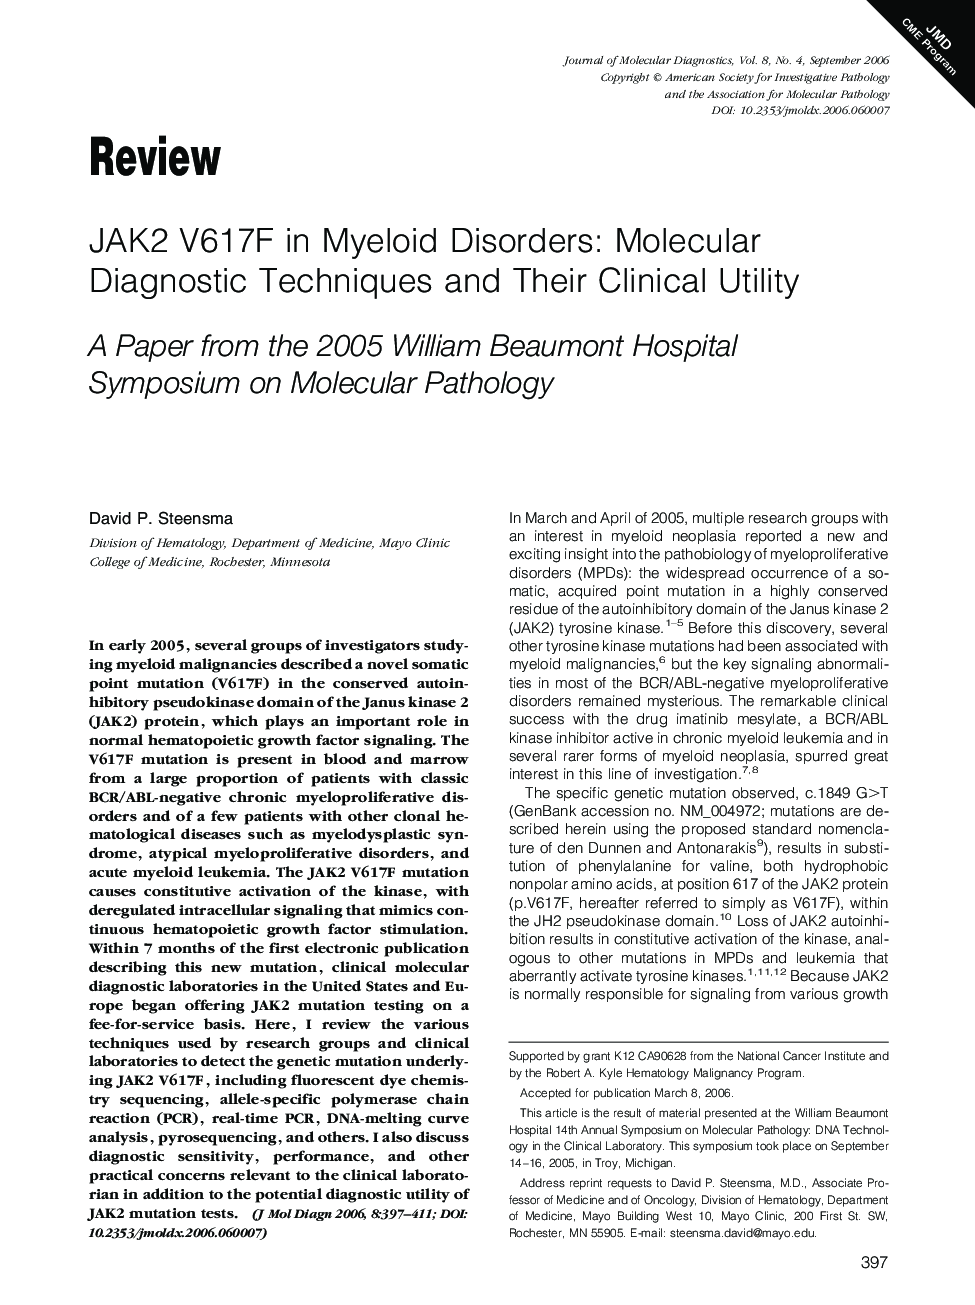 JAK2 V617F in Myeloid Disorders: Molecular Diagnostic Techniques and Their Clinical Utility : A Paper from the 2005 William Beaumont Hospital Symposium on Molecular Pathology